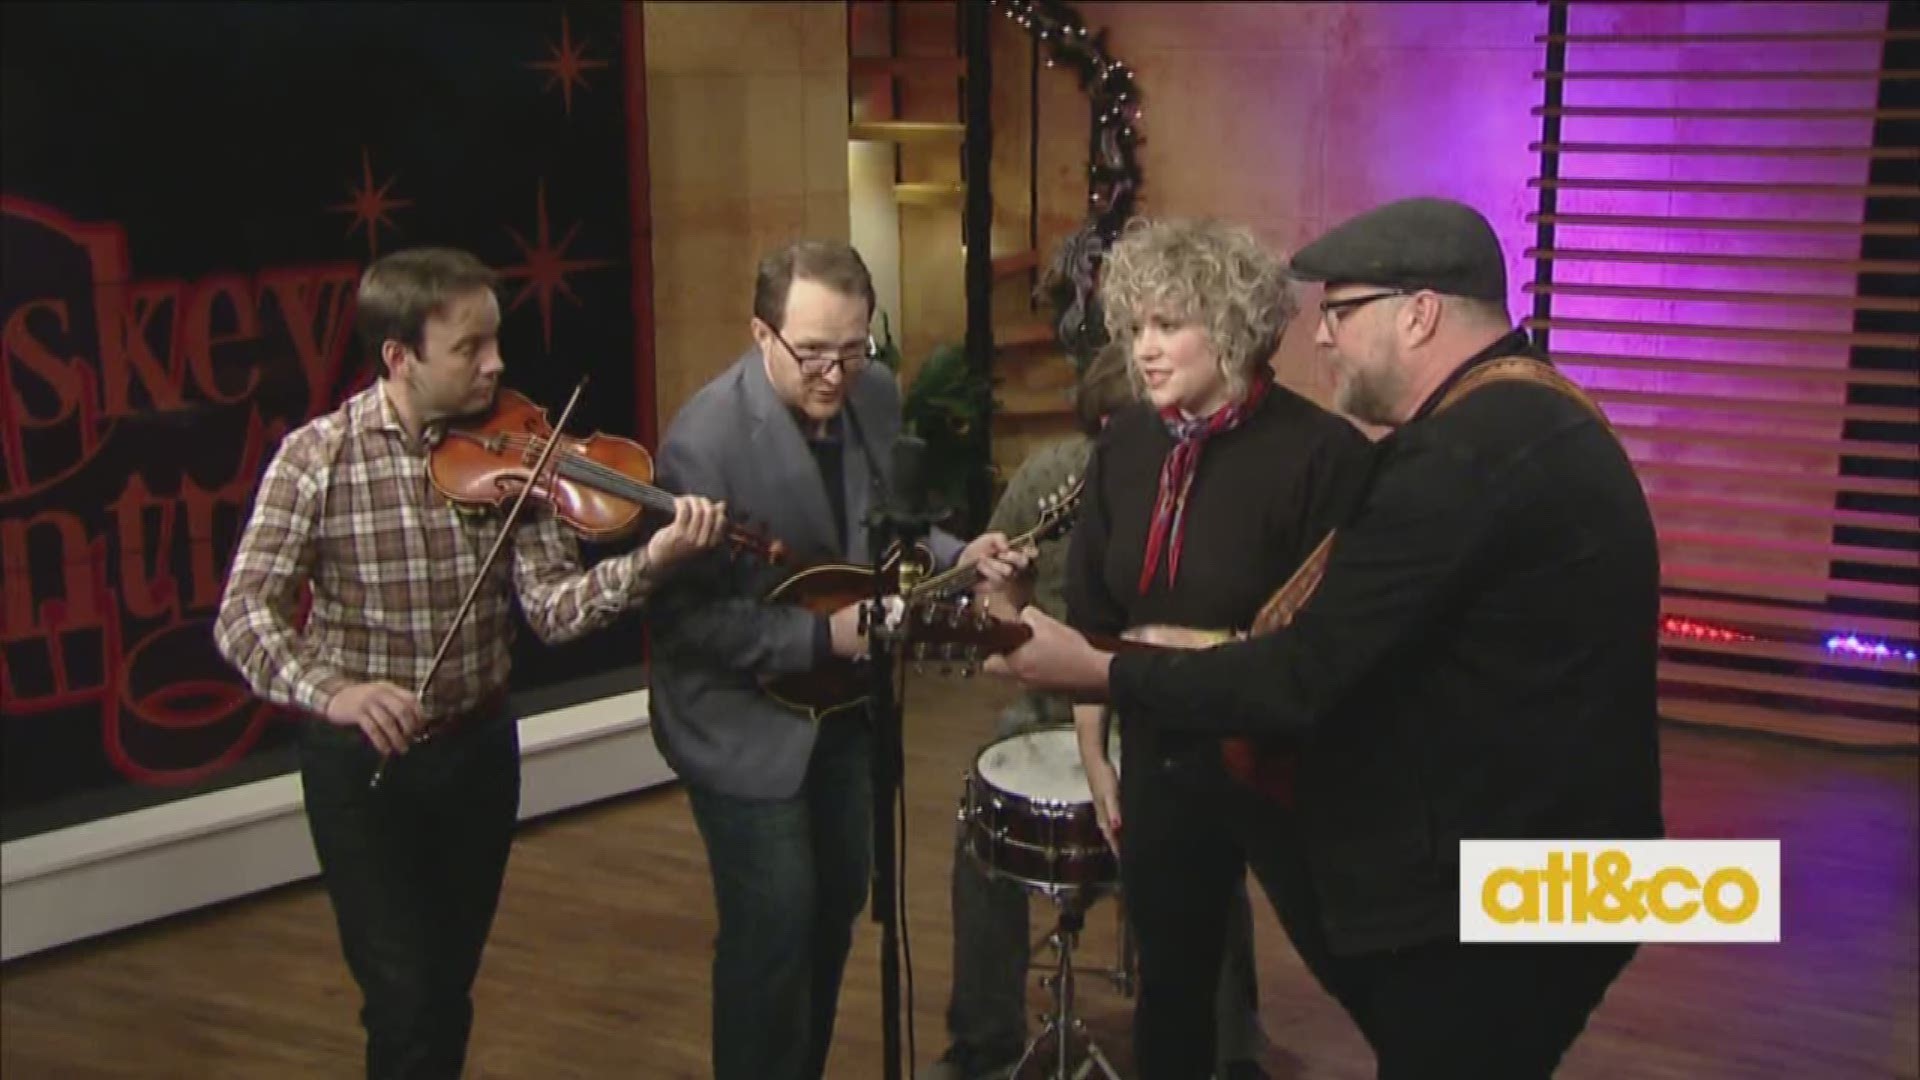 Lauren Morrow and 'The Whiskey Gentry' perform ahead of their final show on 'Atlanta & Company'